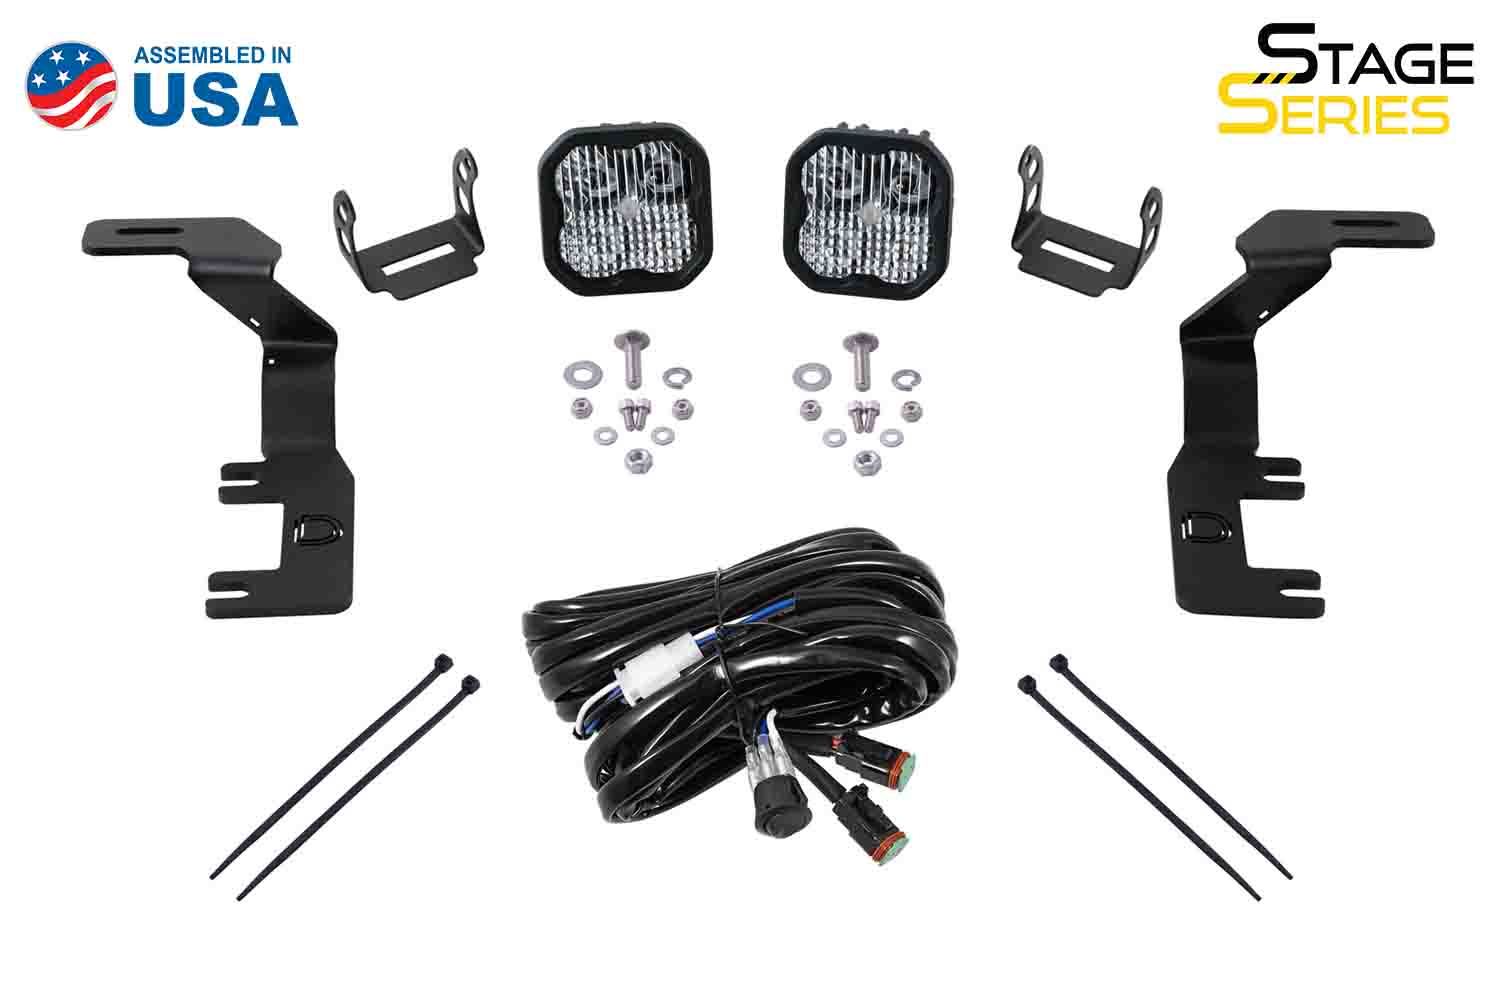 Stage Series Backlit Ditch Light Kit for 2015-2021 Chevrolet Colorado-DD6646-ssdtch-0628